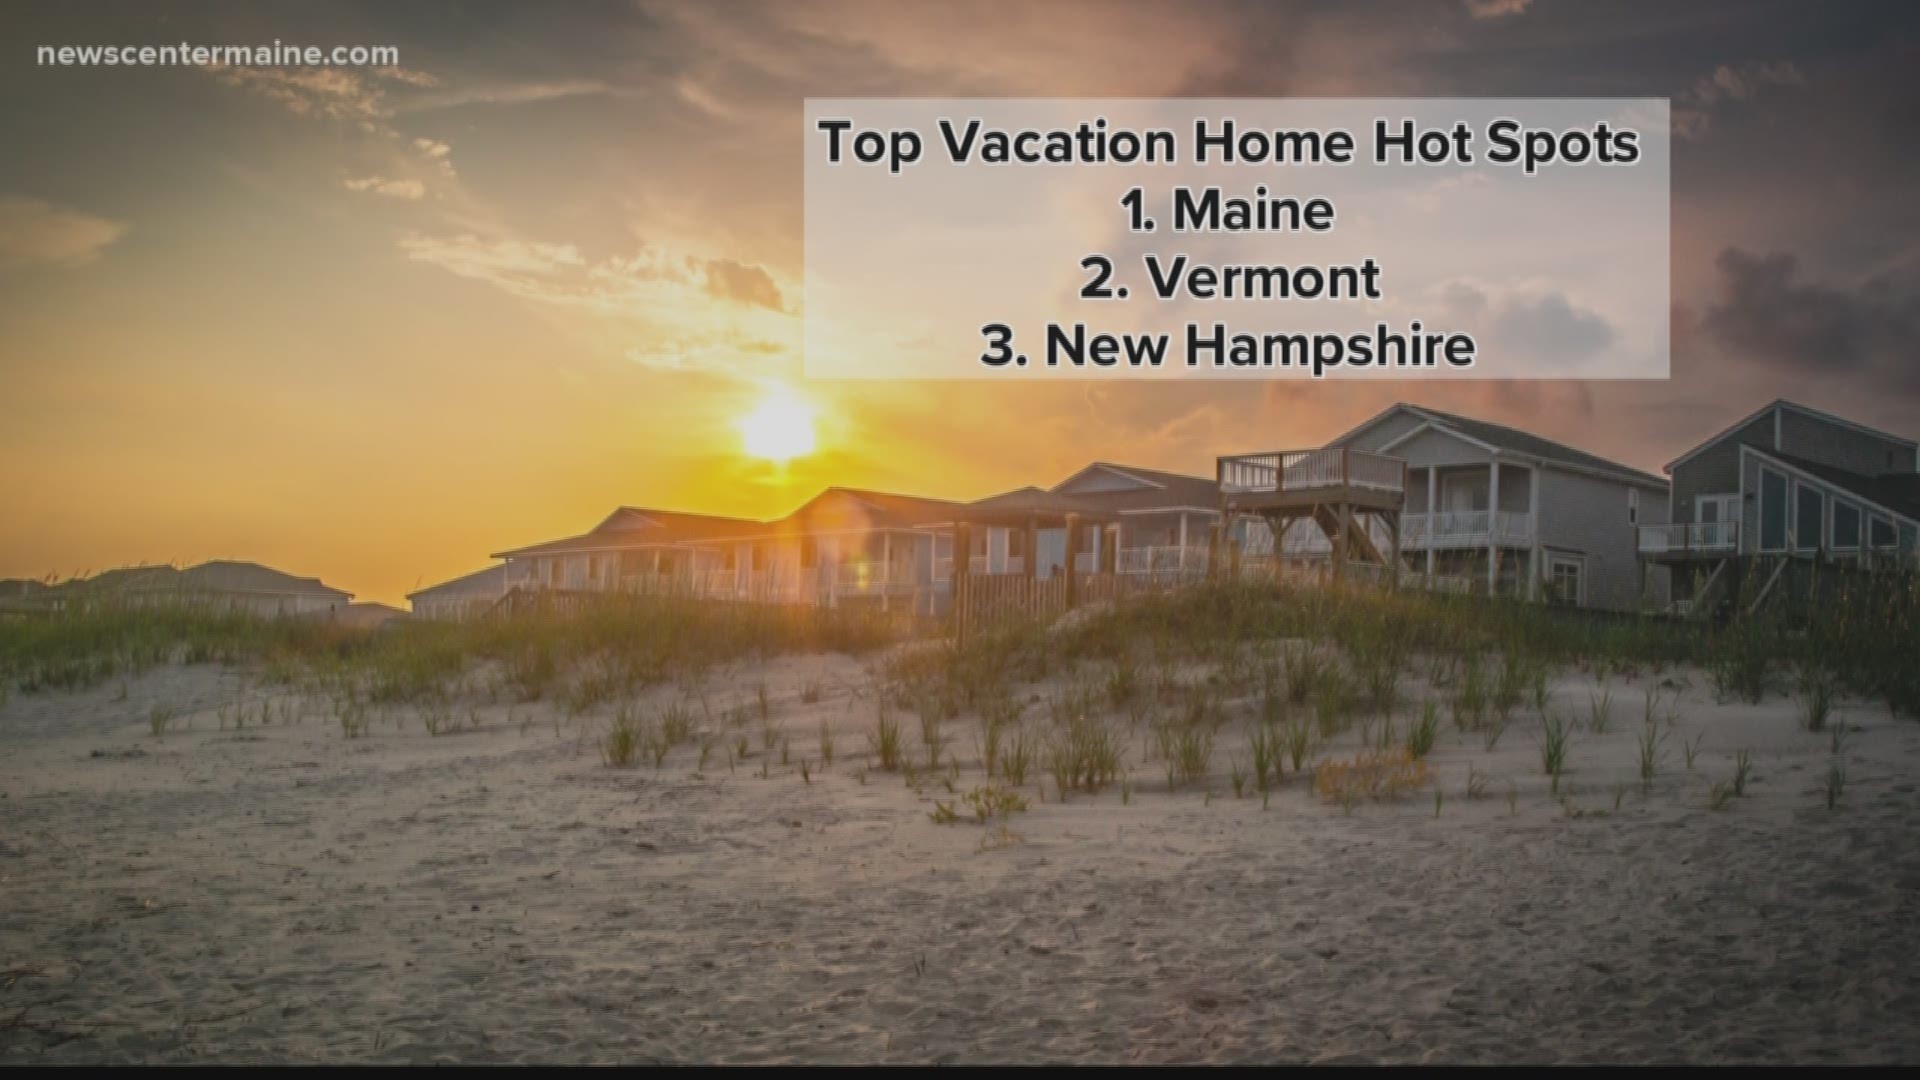 Maine ranked top state for vacation homes.